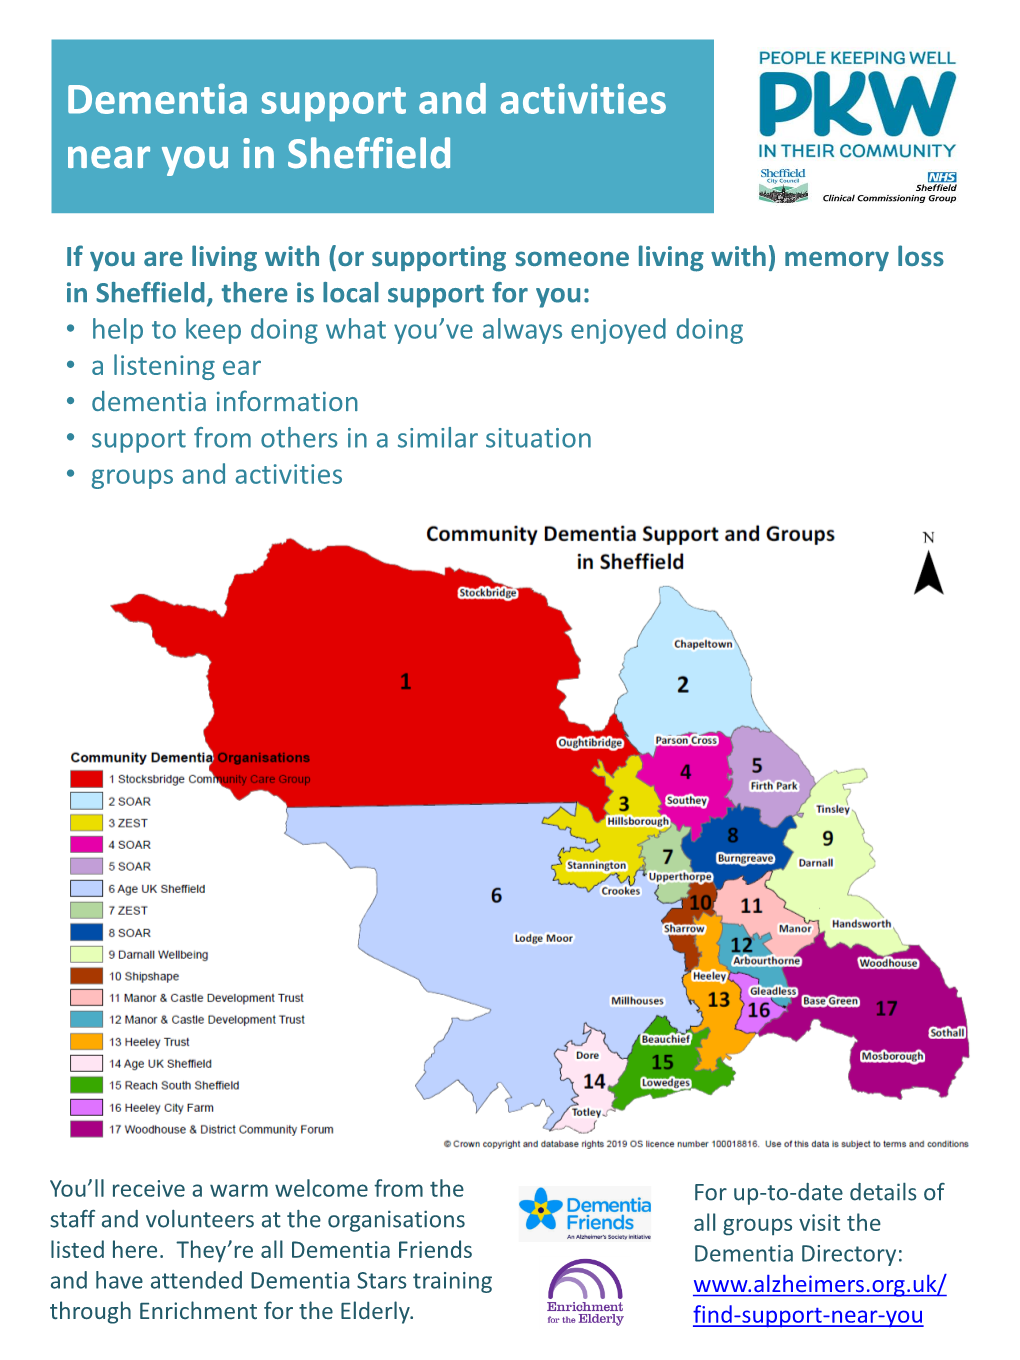 Dementia Support and Activities Near You in Sheffield